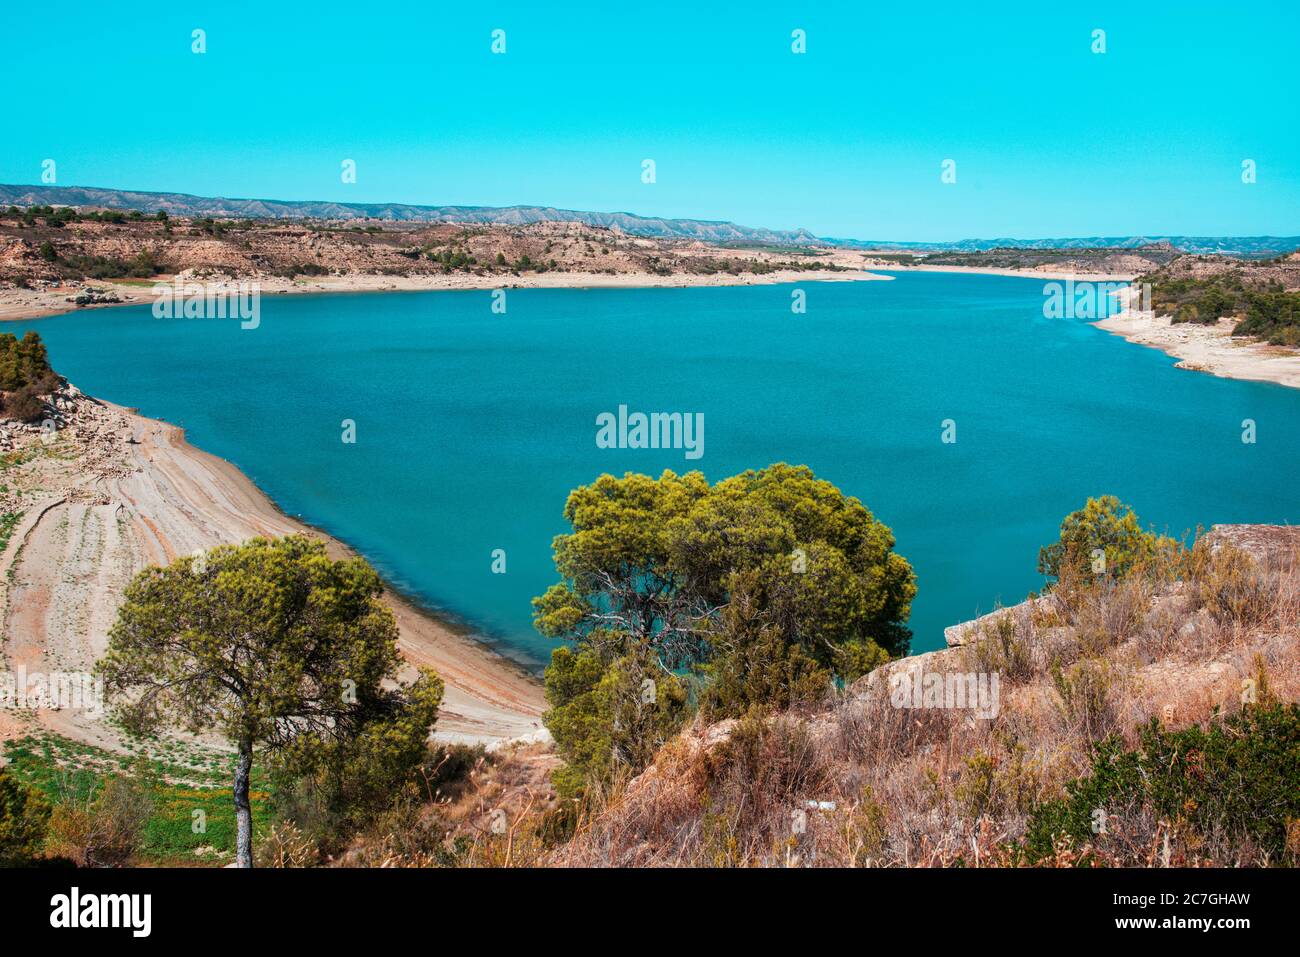 a view of the Mequinenza Reservoir, in the Ebro river, also known as Mar de Aragon, Sea of Aragon, in the Zaragoza province, Spain Stock Photo